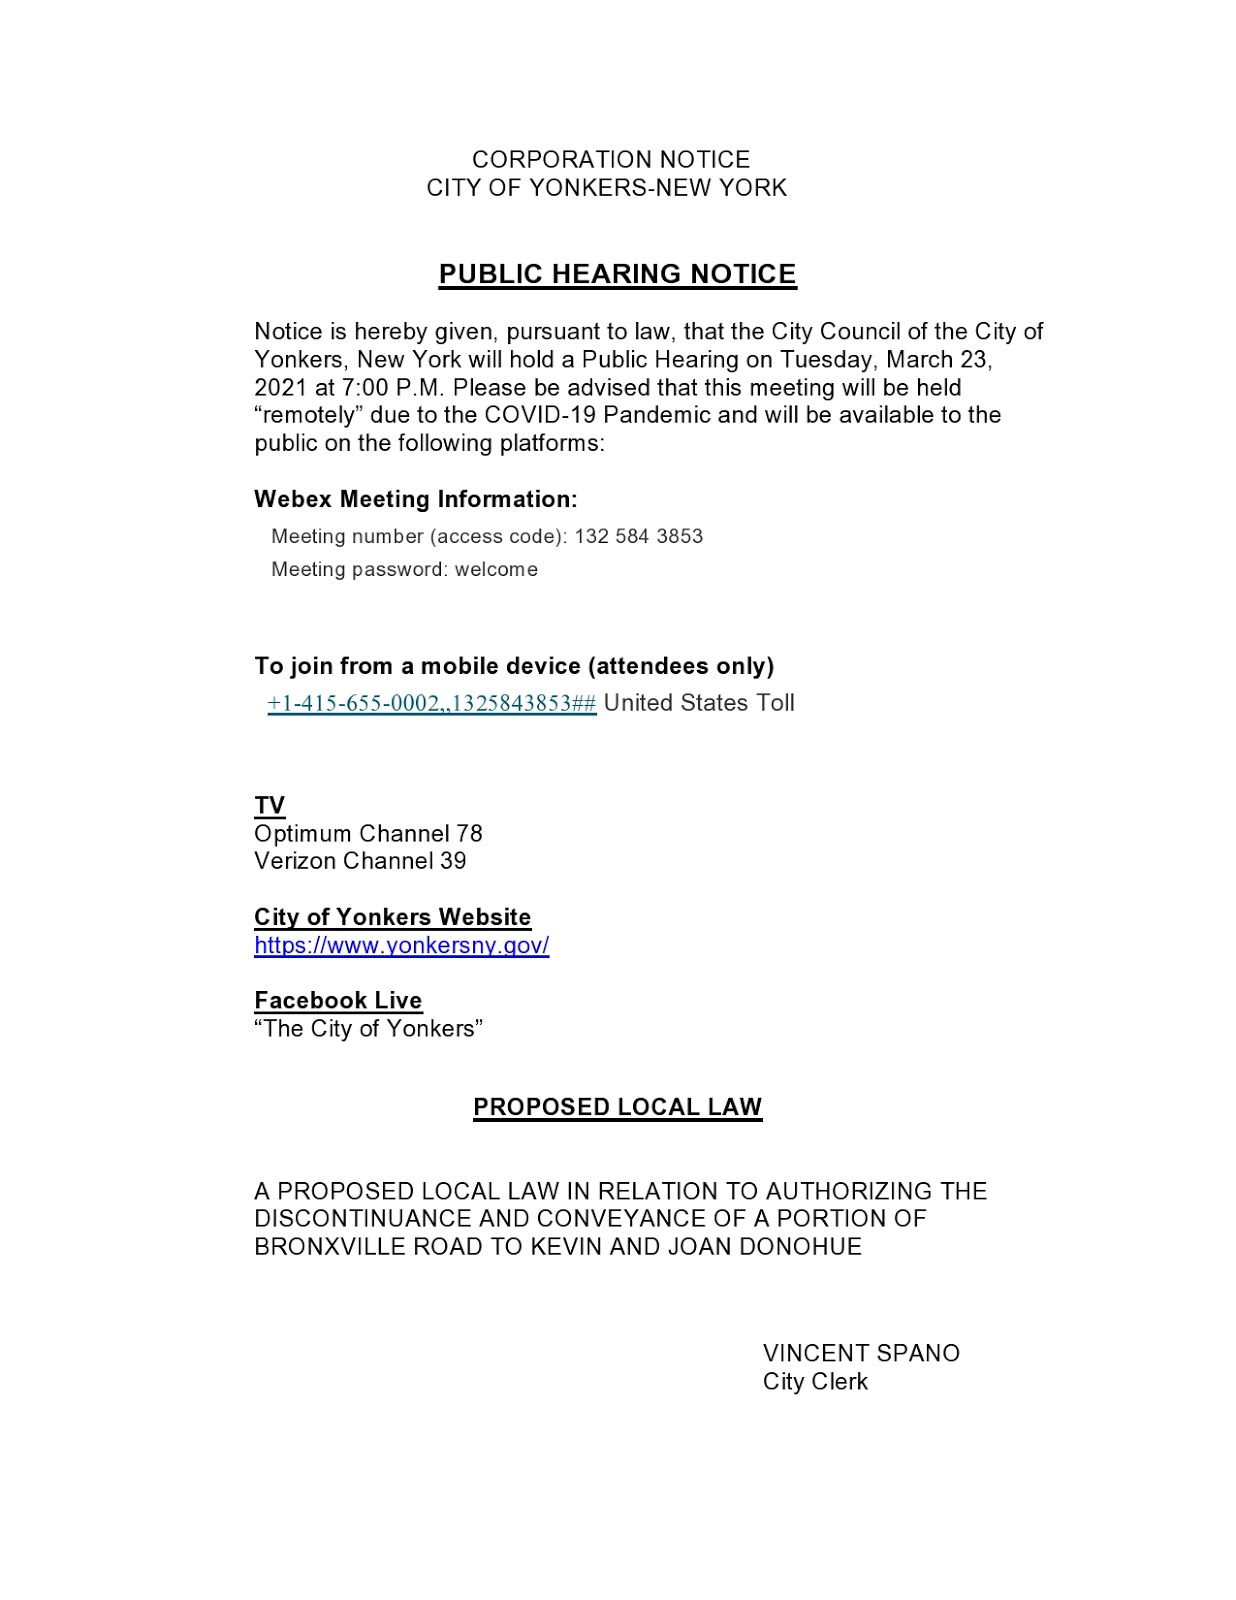 City of Yonkers Legal Notice.